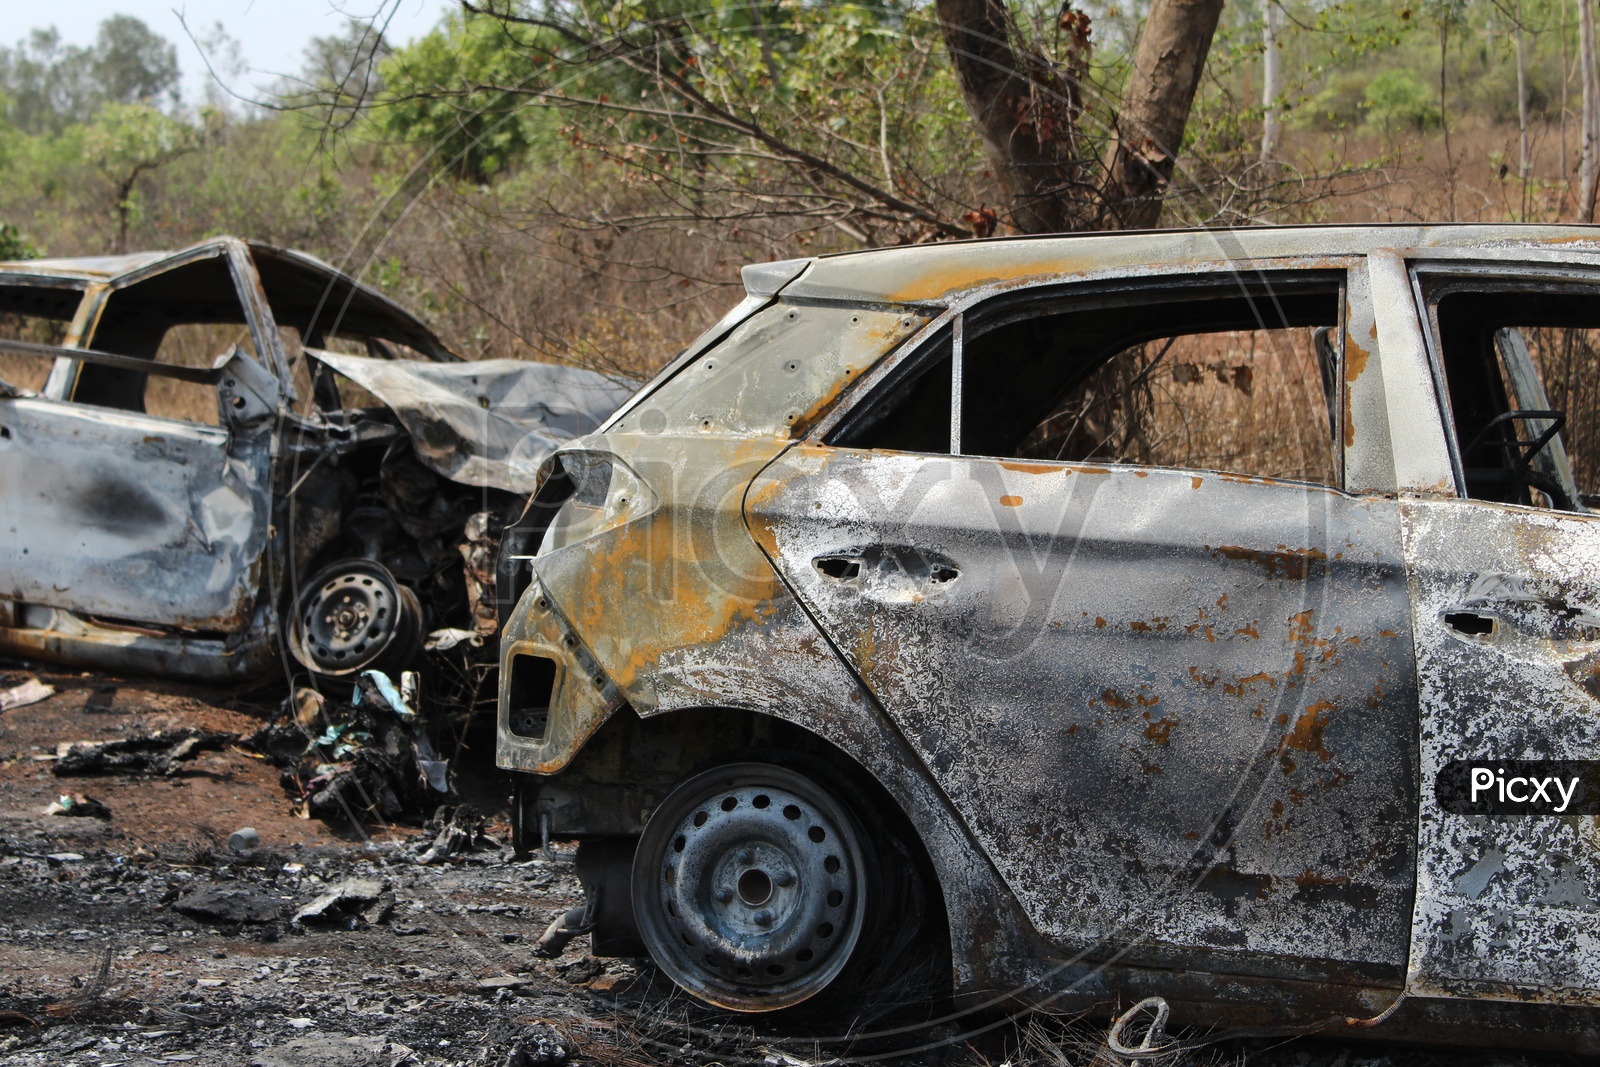 Burnt Cars In an Accident